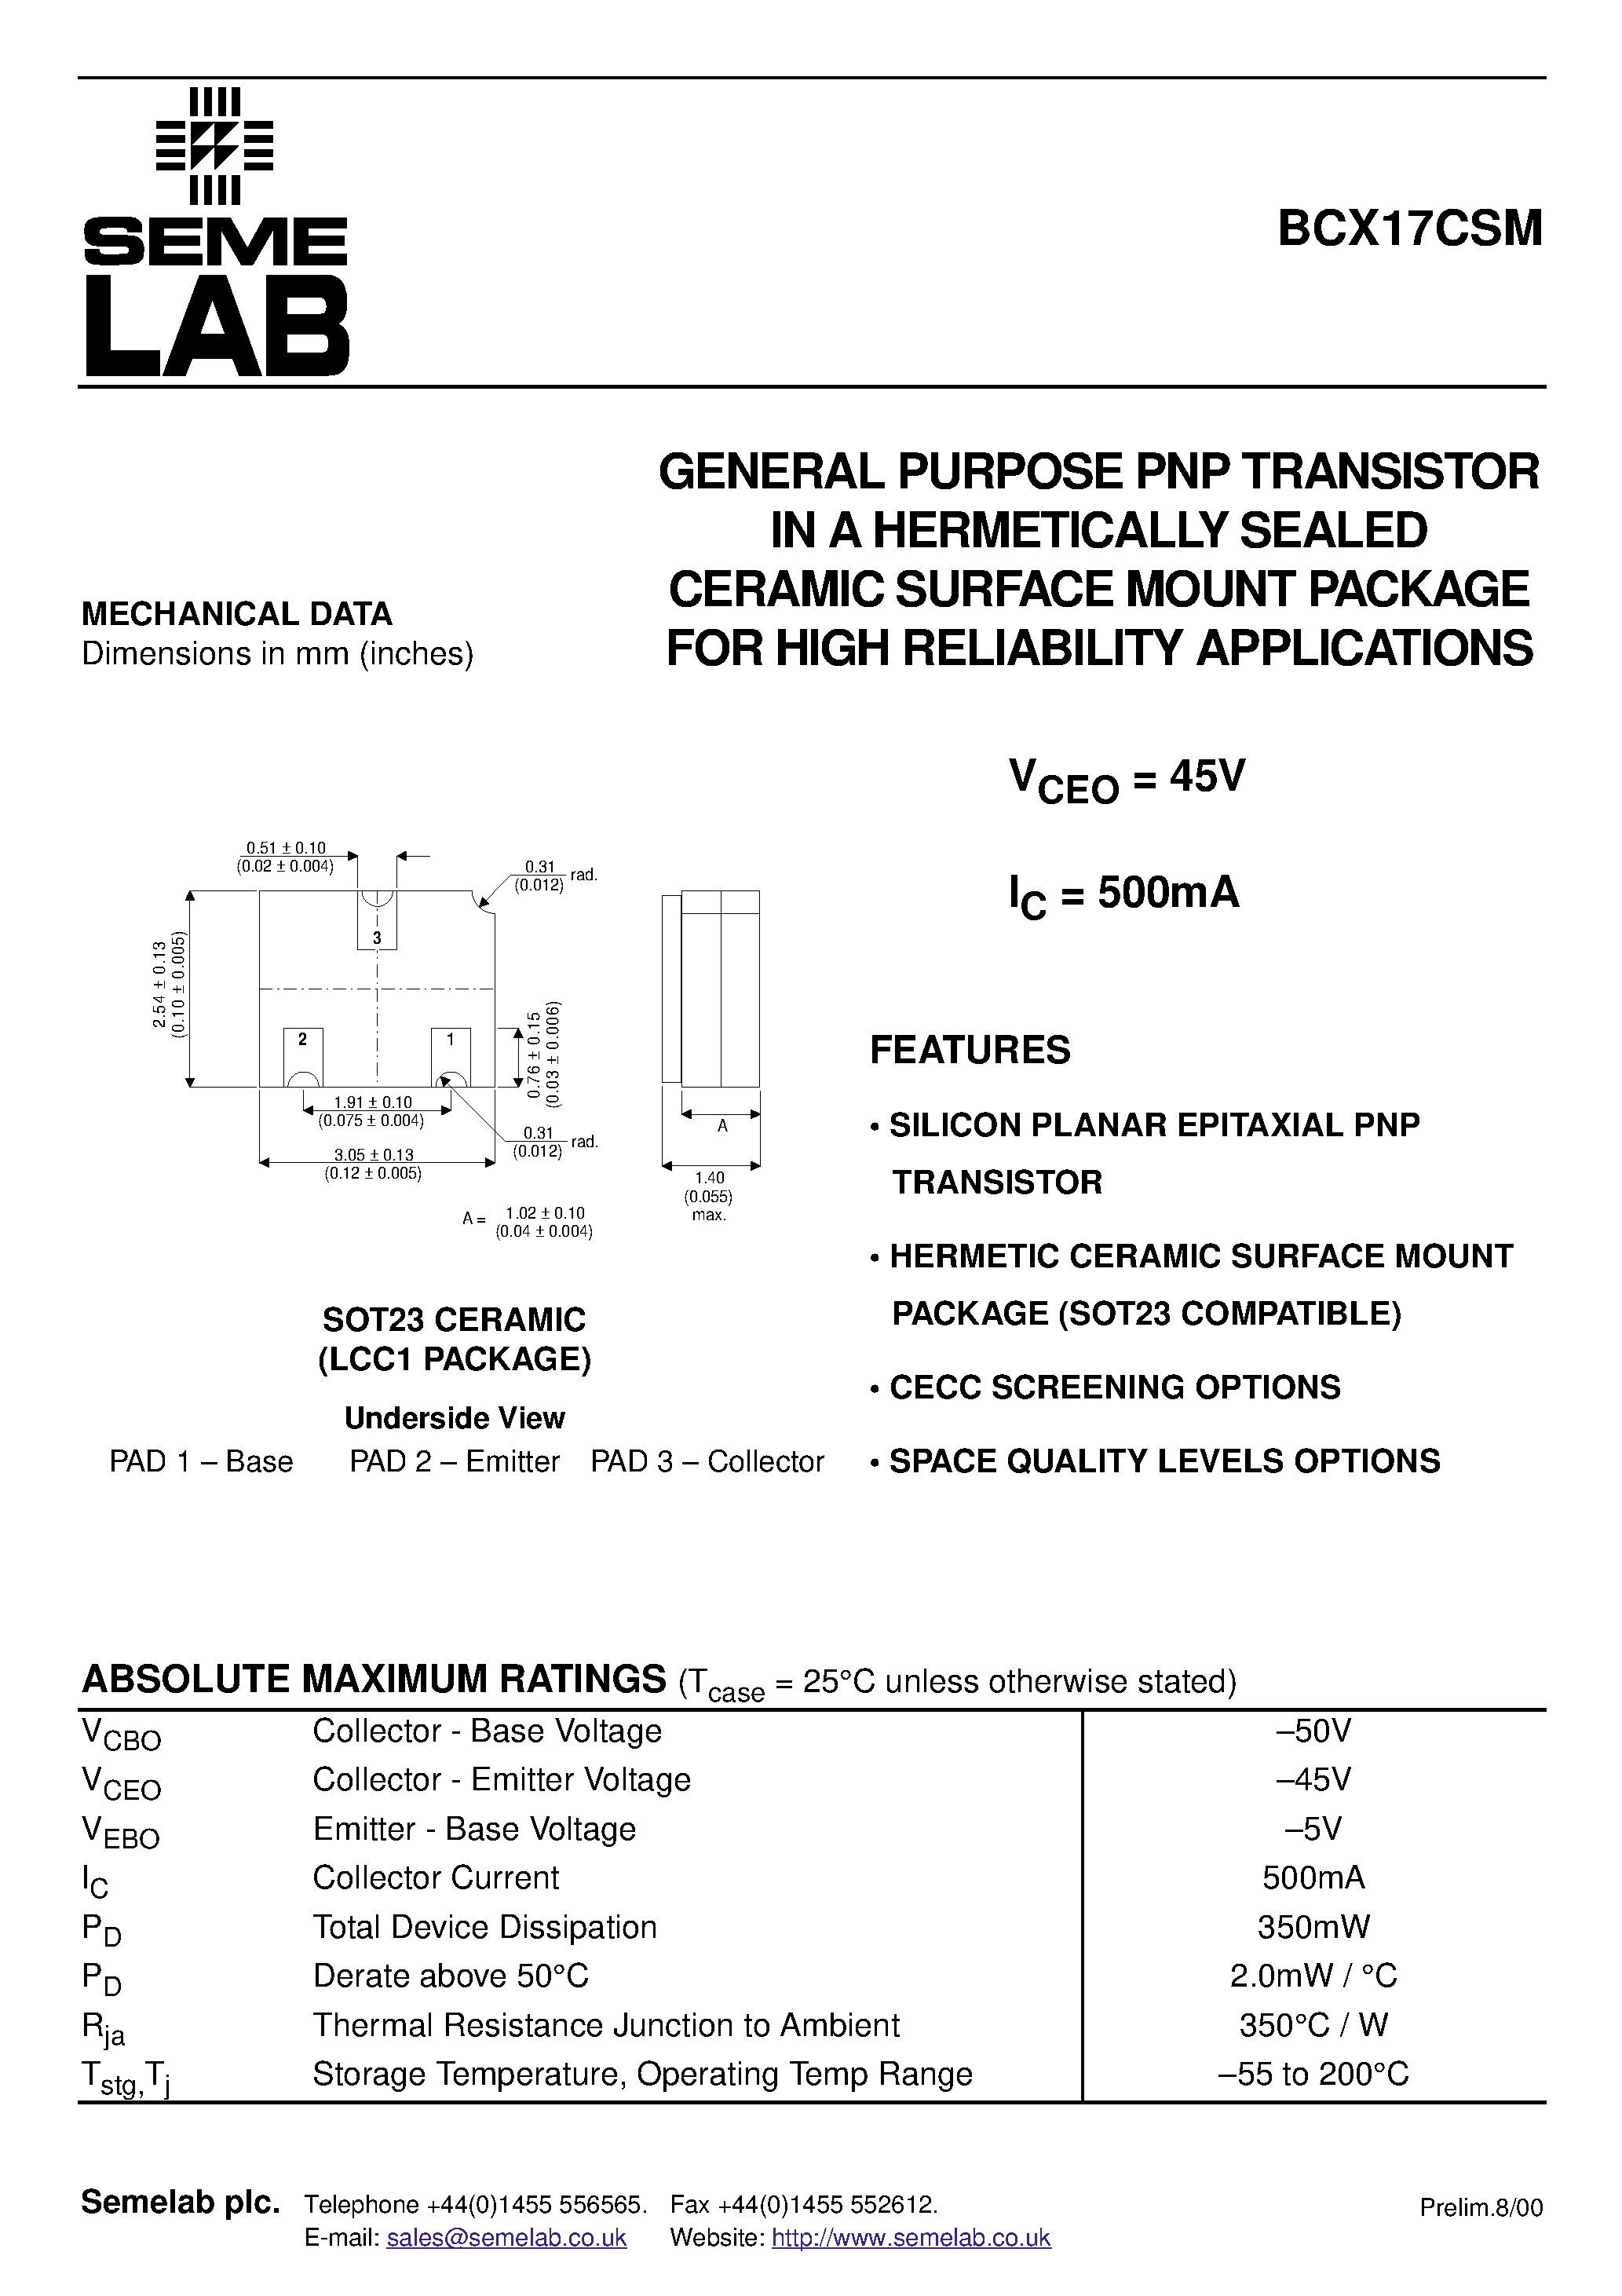 Даташит BCX17CSM - GENERAL PURPOSE PNP TRANSISTOR IN A HERMETICALLY SEALED CERAMIC SURFACE MOUNT PACKAGE FOR HIGH RELIABILITY APPLICATIONS страница 1